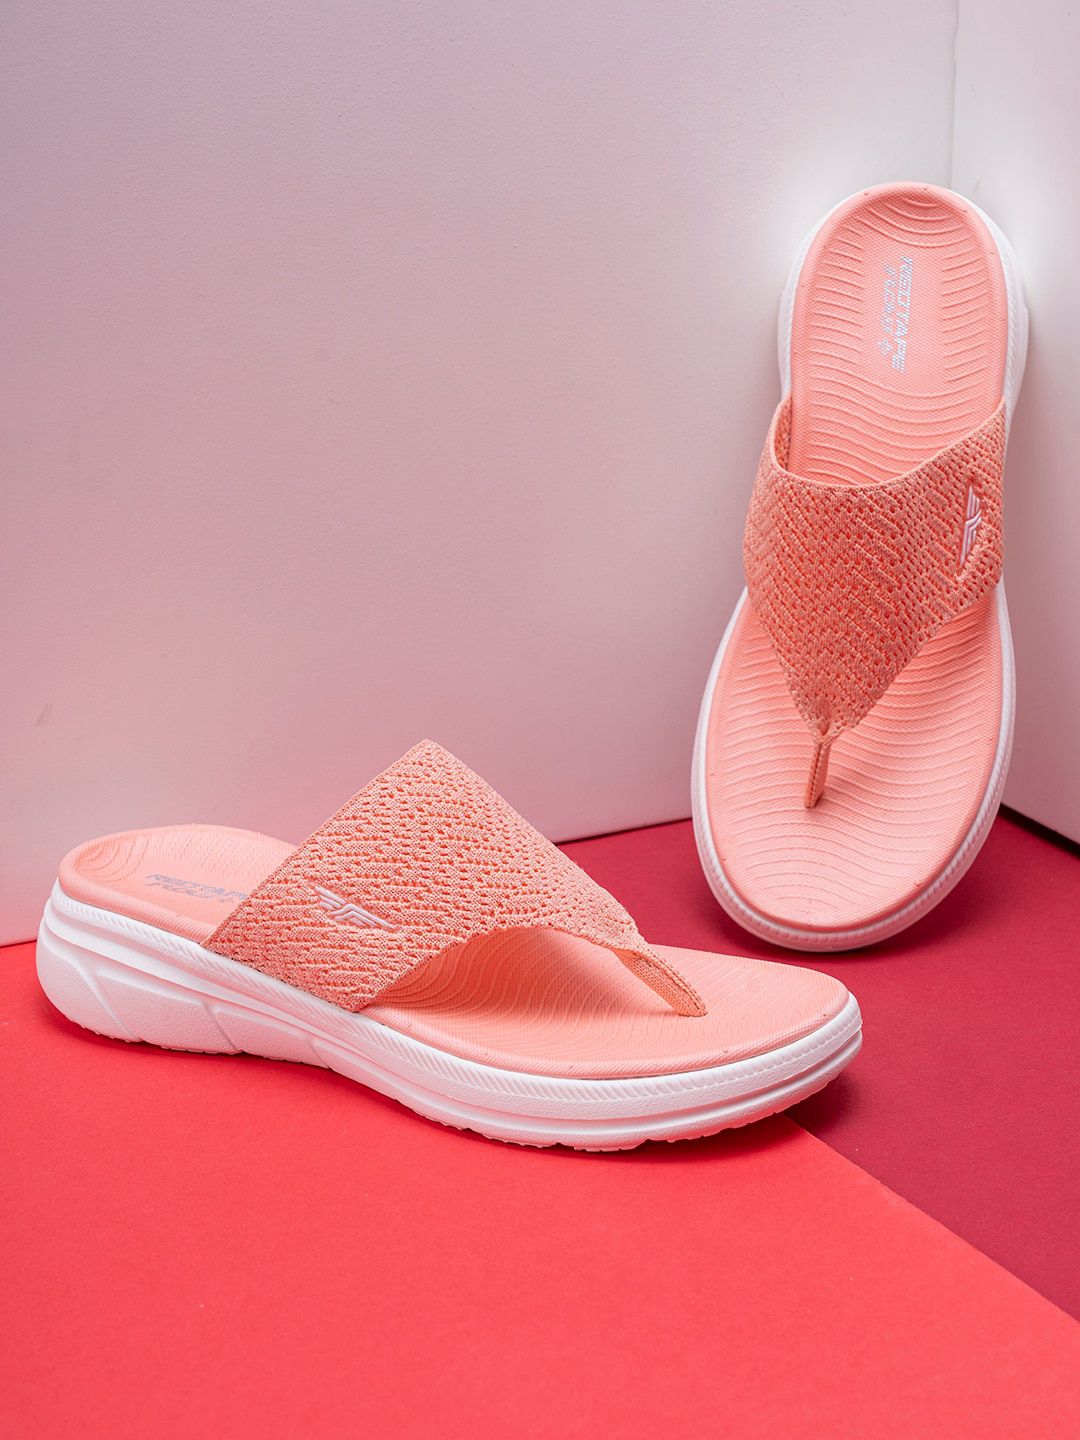 Red Tape Woven Design T-Strap Flats Price in India